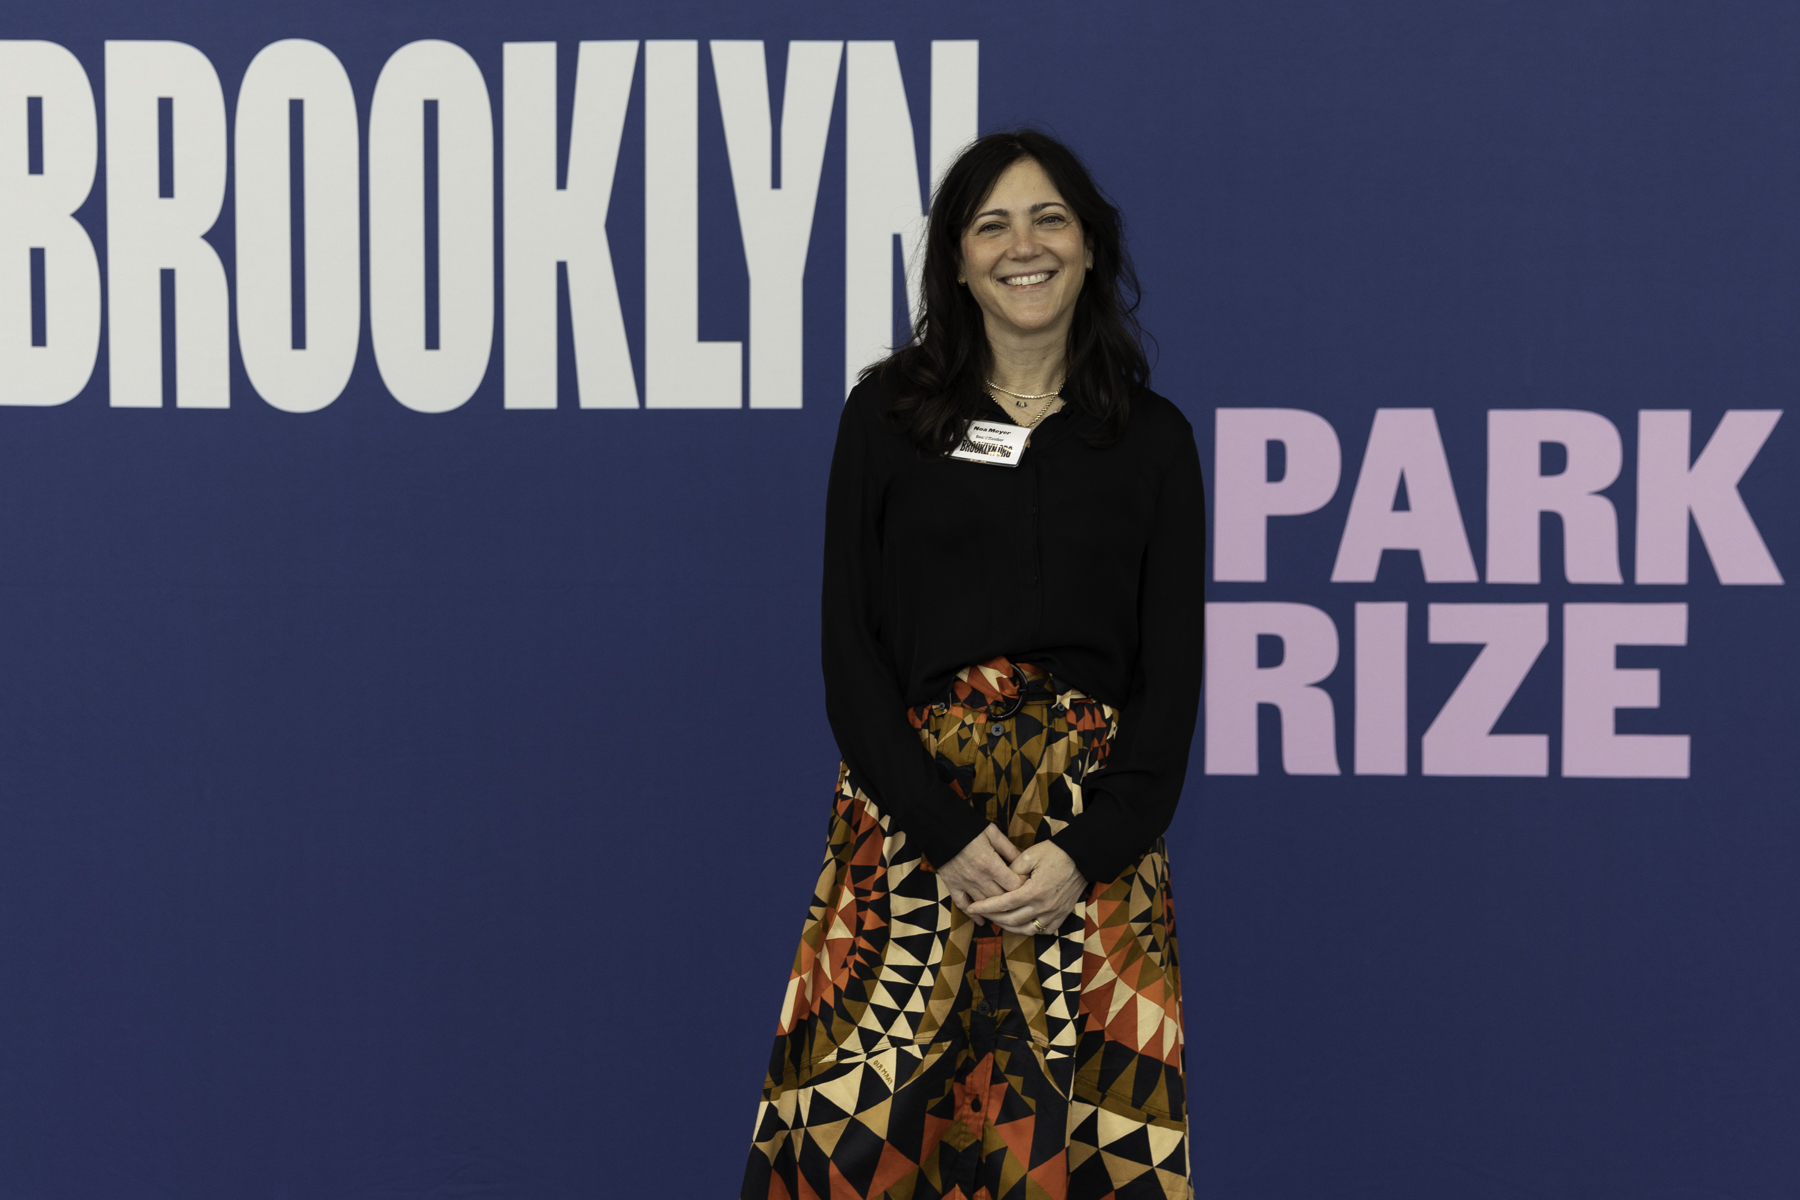 Woman standing in front of a "brooklyn book prize" backdrop with a name tag, smiling for the camera.